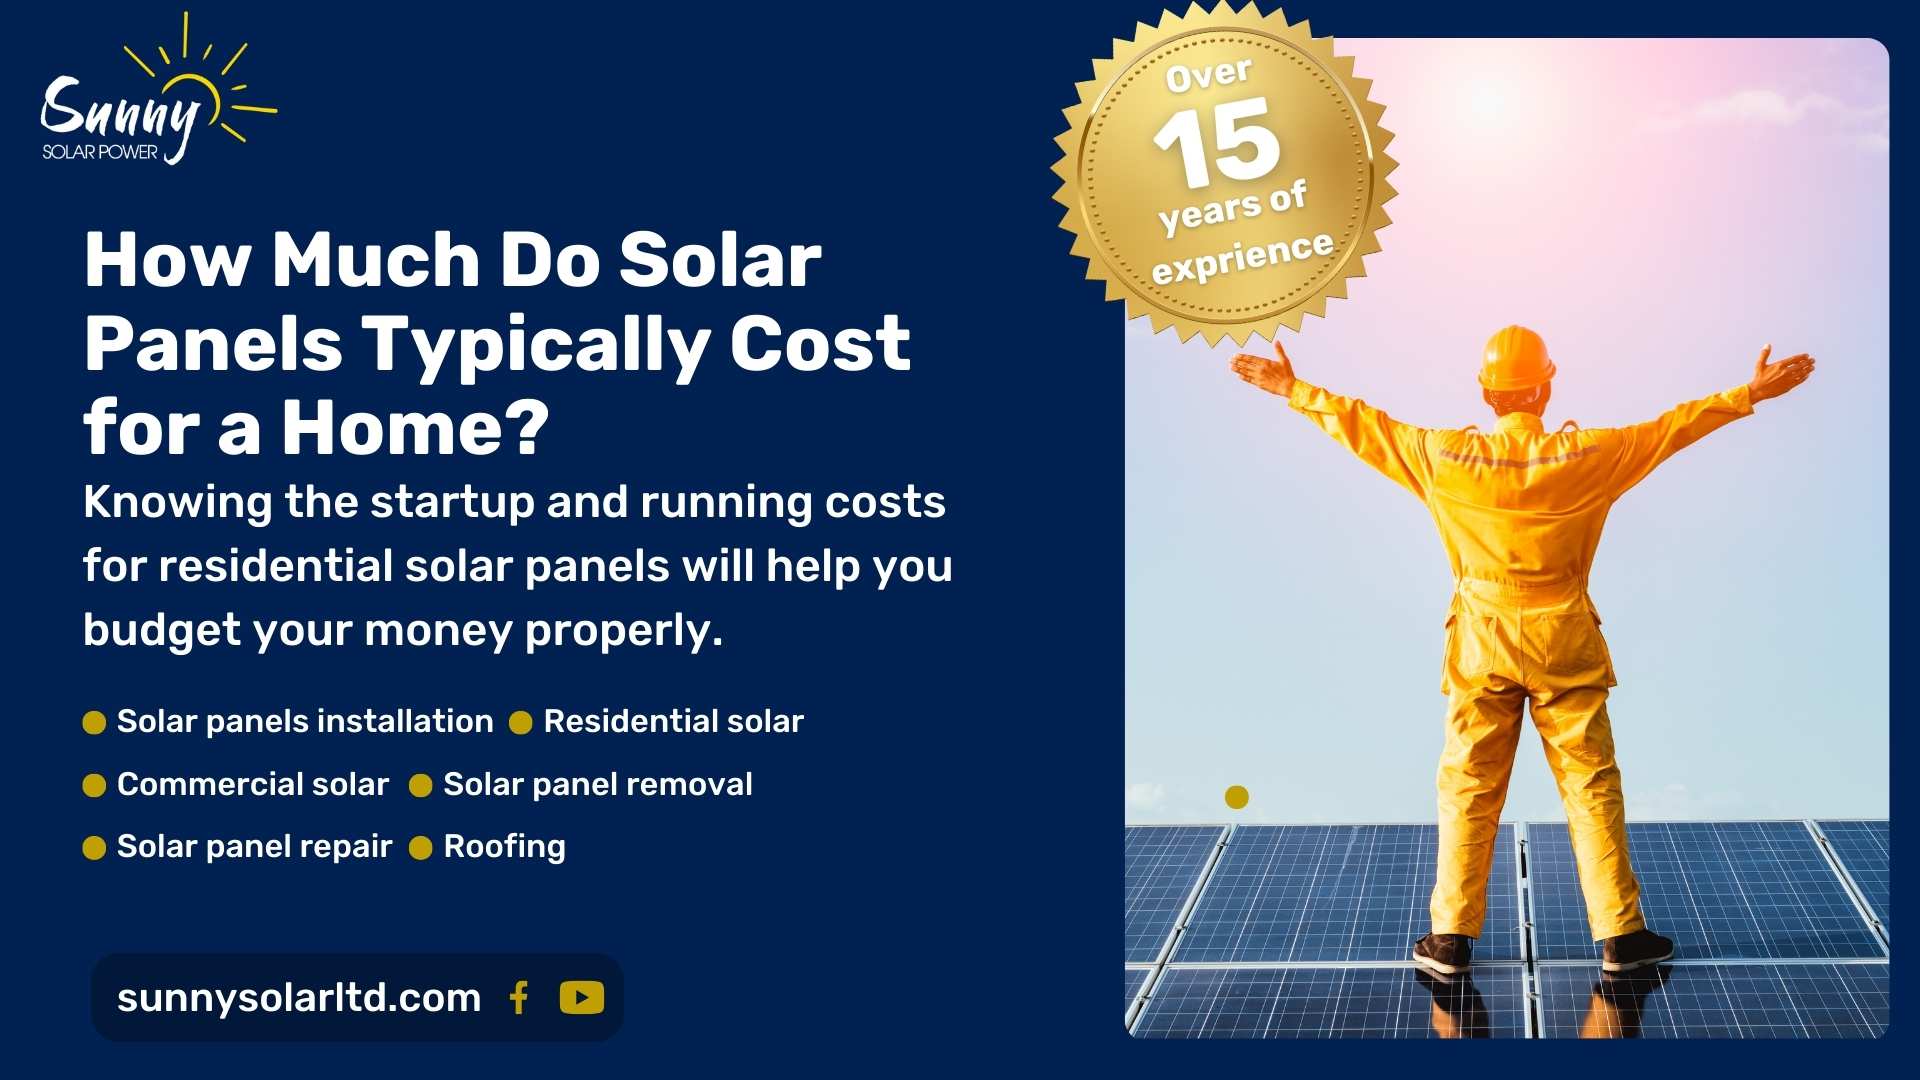 How Much Do Solar Panels Typically Cost for a Home?